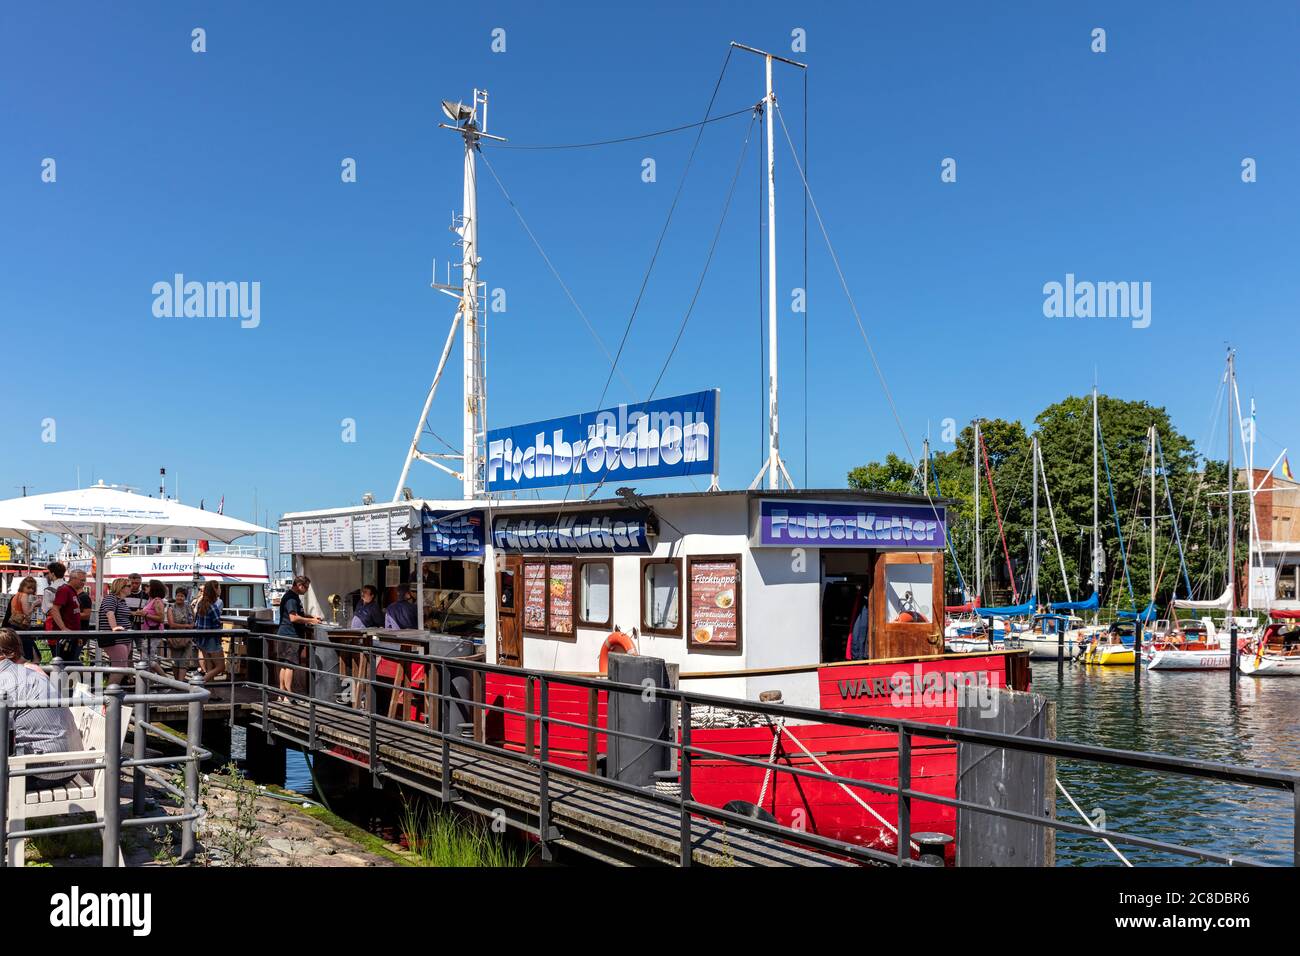 fish bar ‘Futterkutter’ at the canal called ‘Alter Strom’ (Old Channel) in the Warnemünde district of the city of Rostock in Mecklenburg, Germany Stock Photo